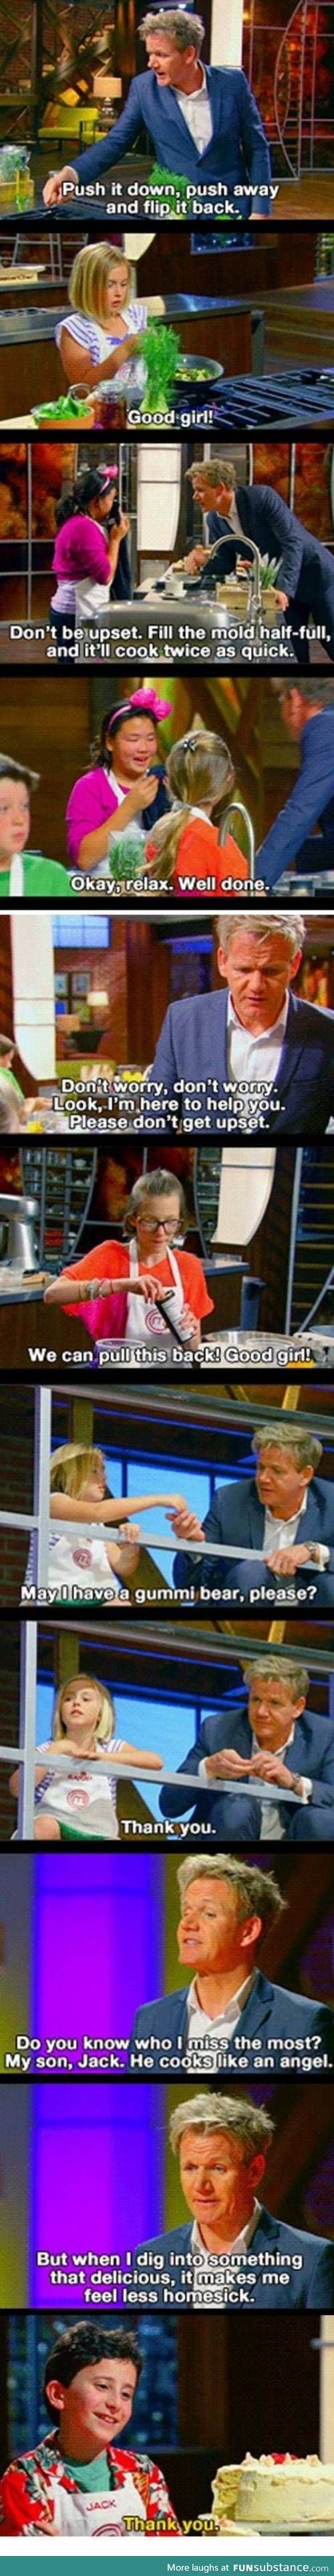 Gordon Ramsay's not in hell when it comes to kids.